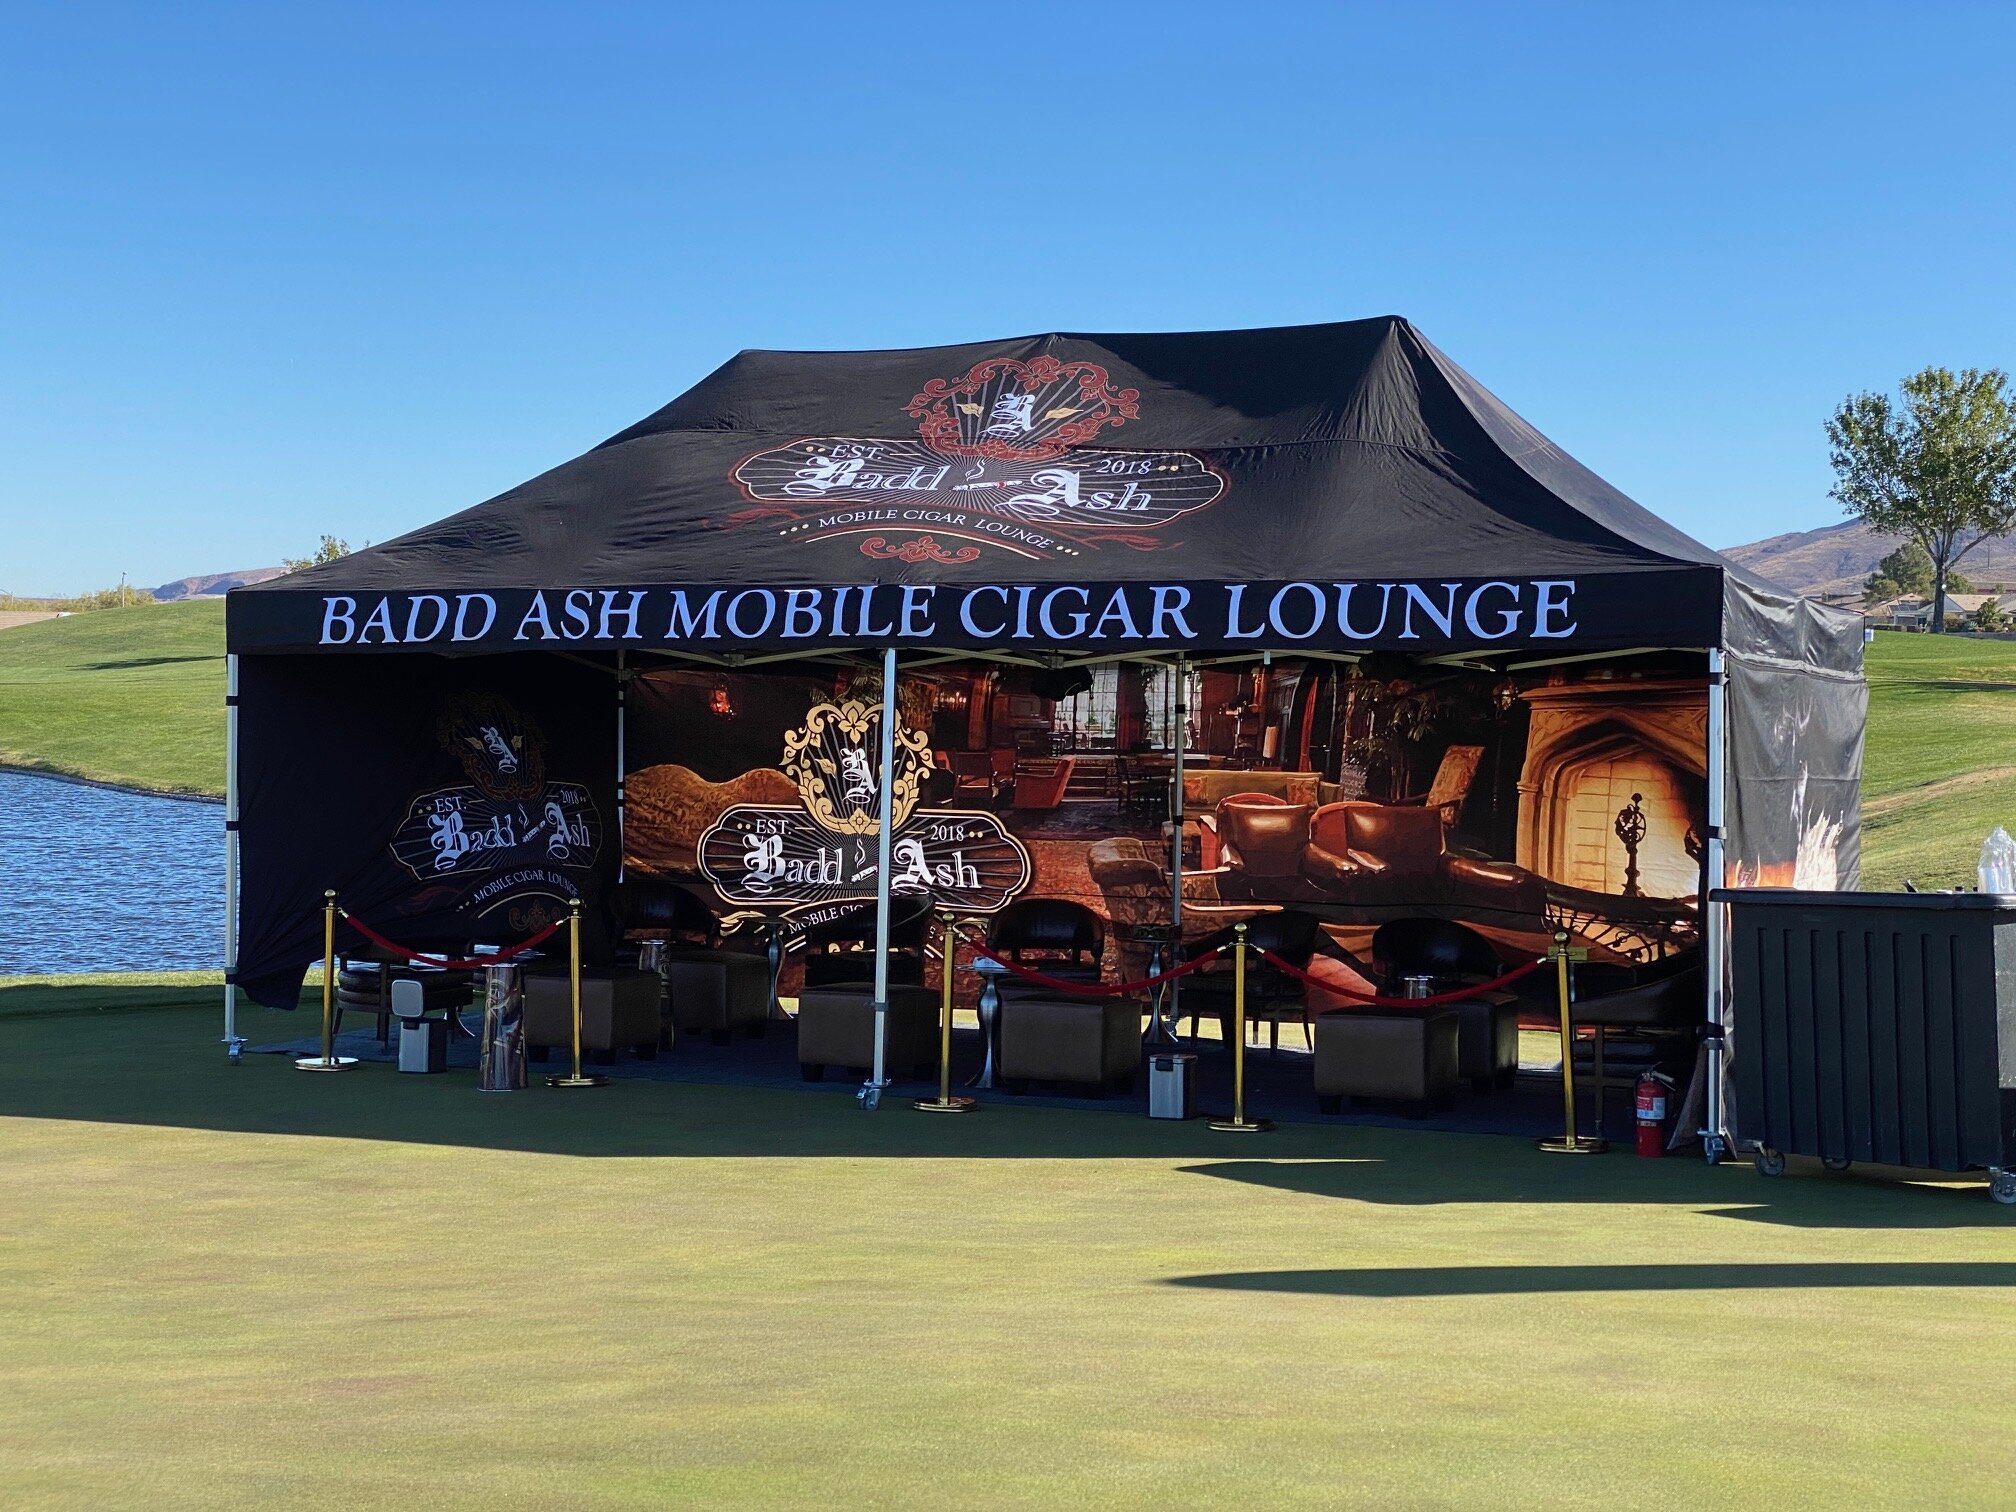 The iconic cigar tent